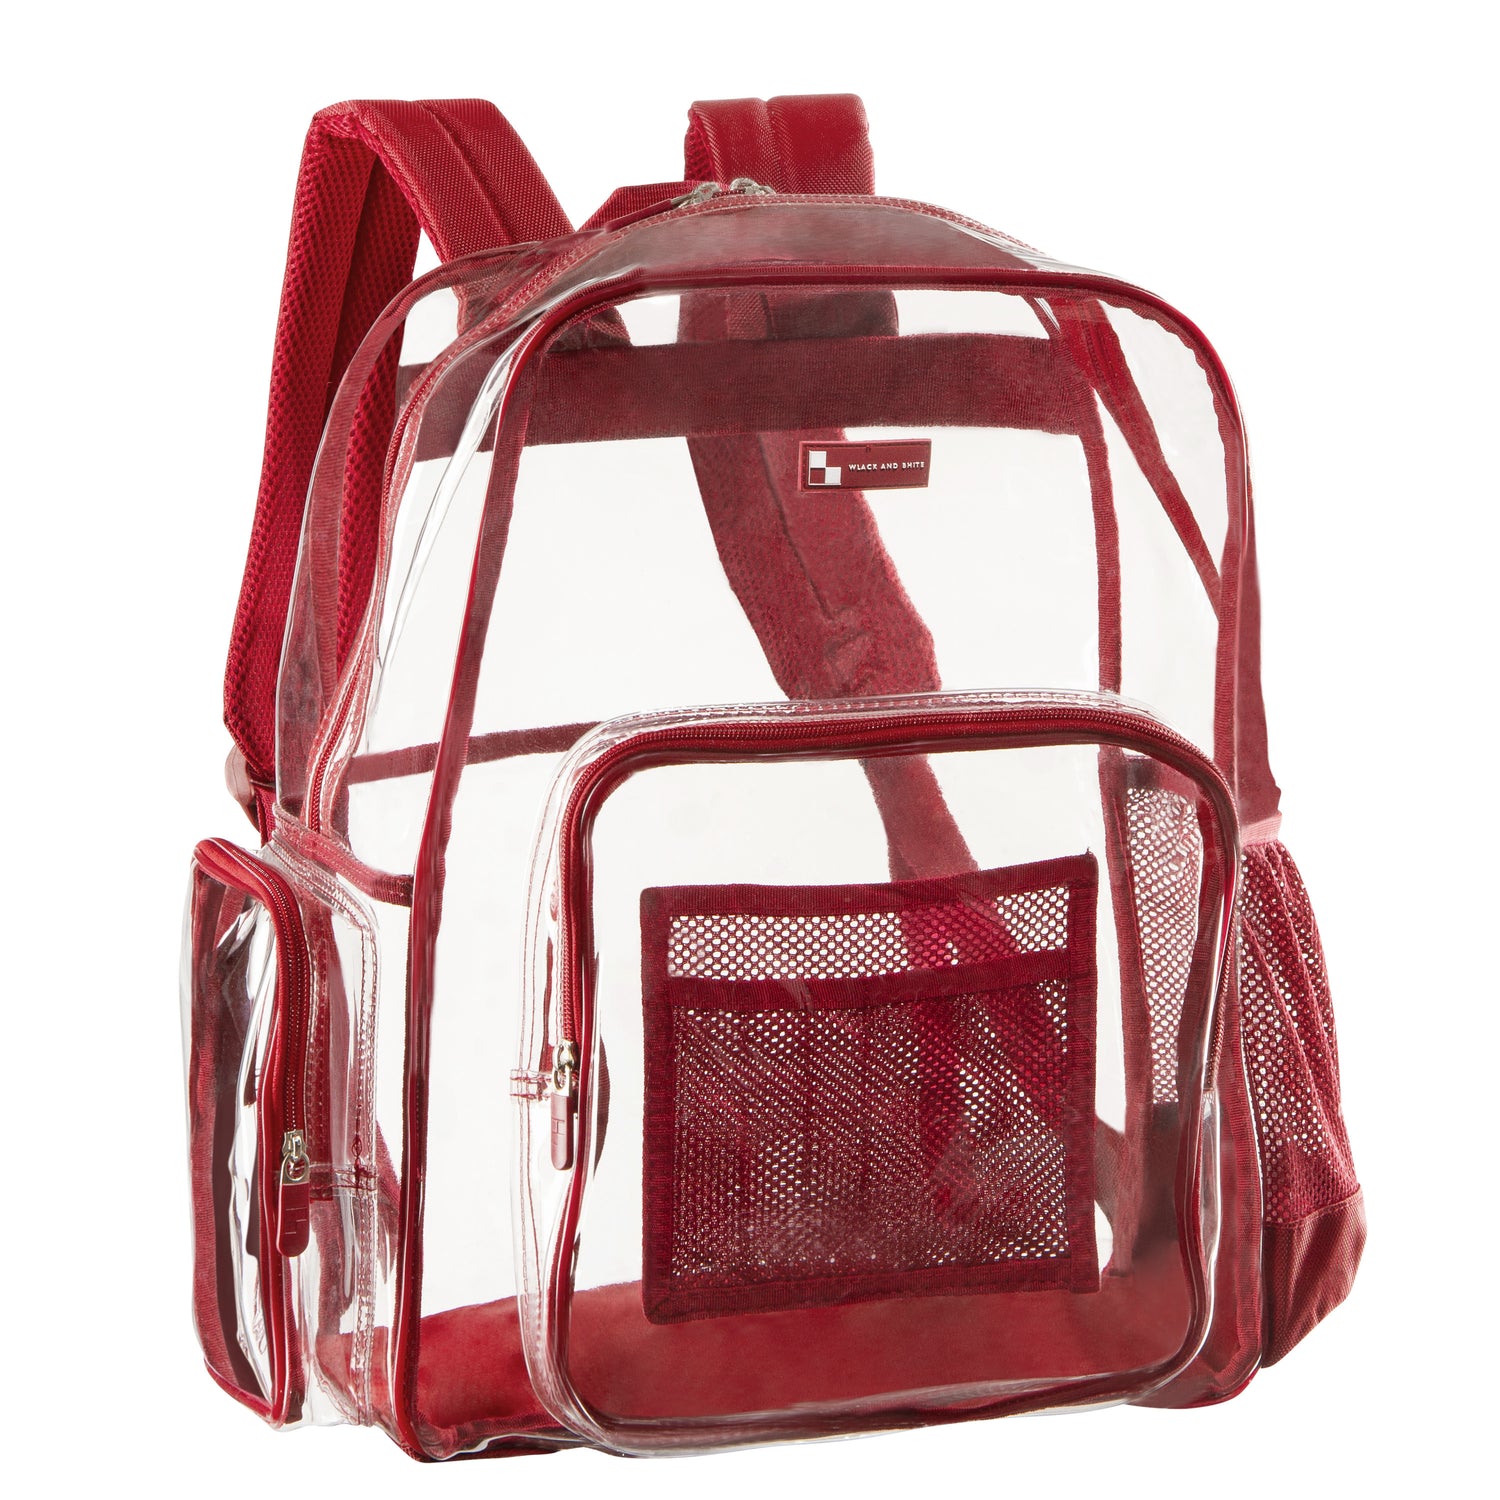 Heavy Duty Clear Backpack With Mesh Organizer - Large